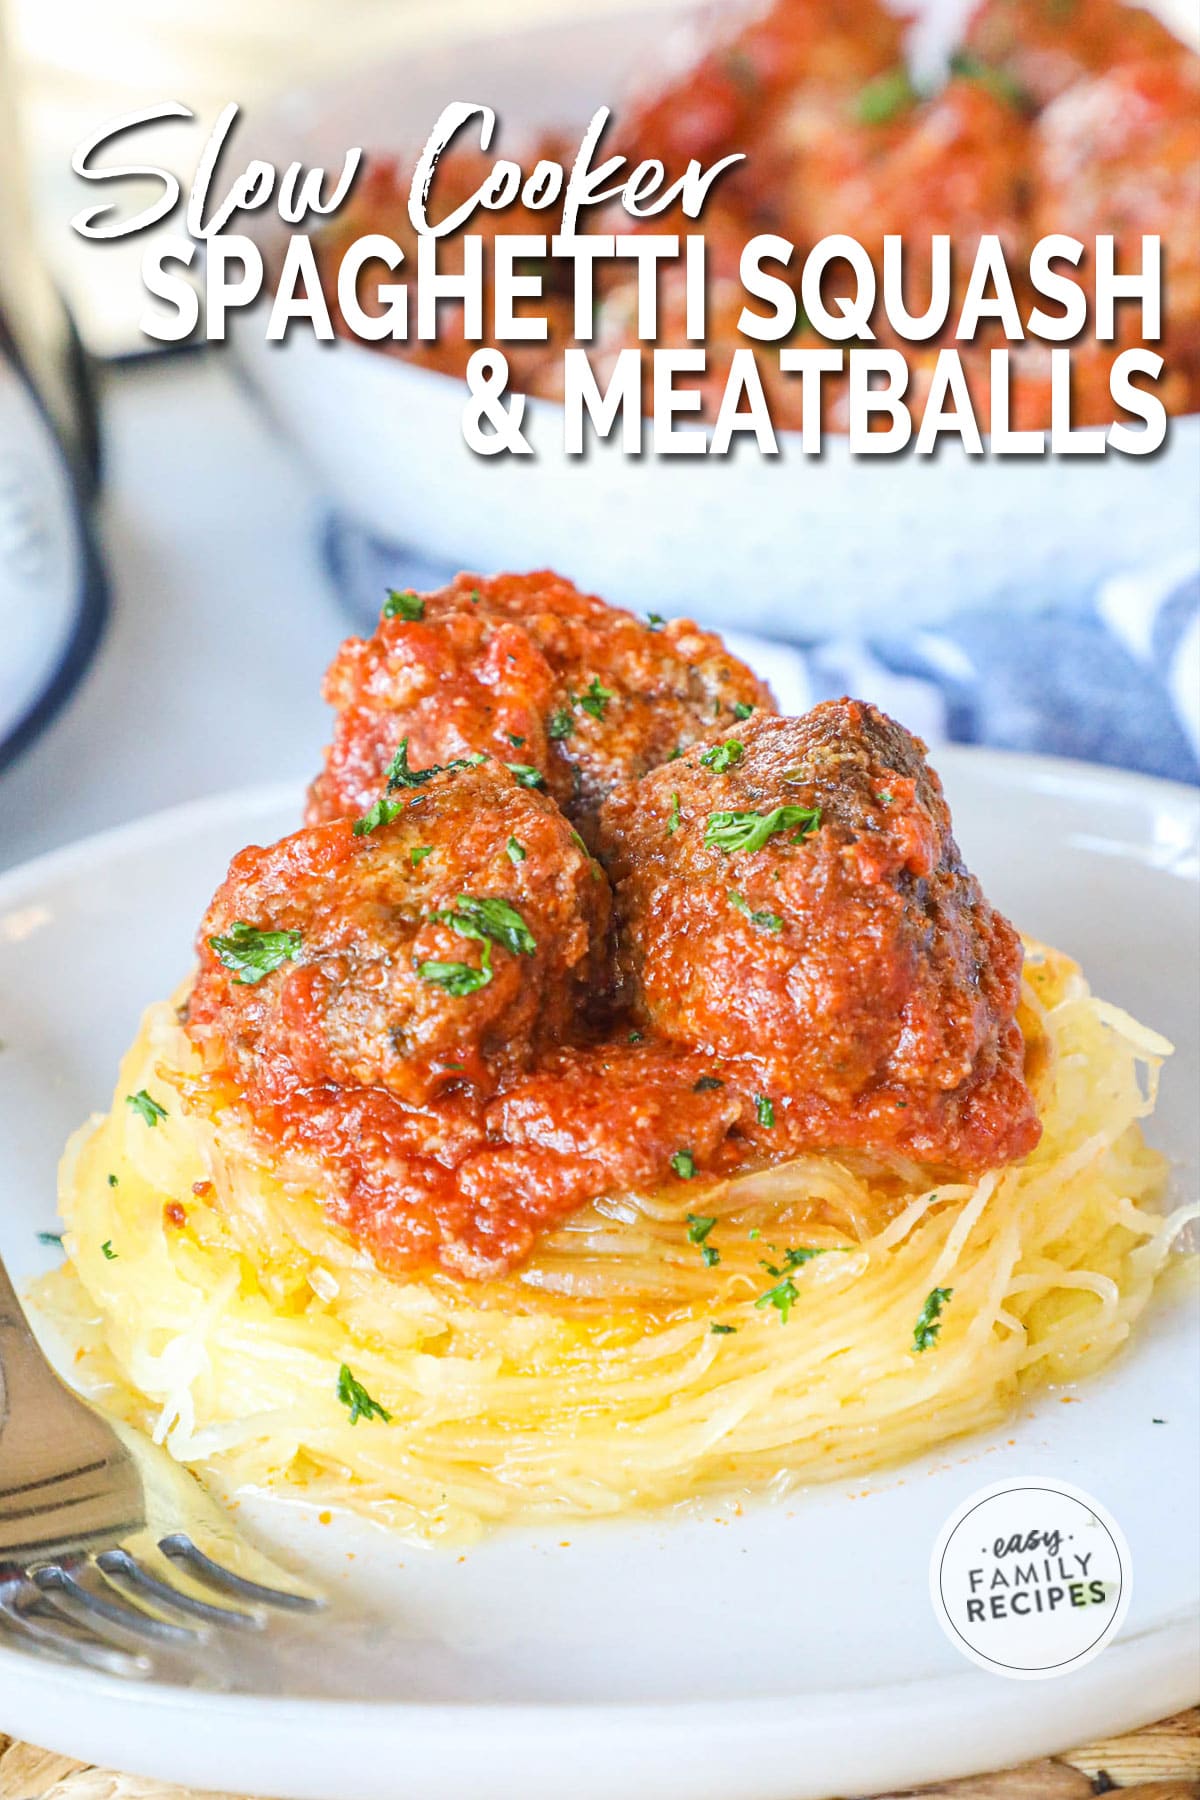 Beef Meatballs on Spaghetti Squash with sauce made in a crock pot